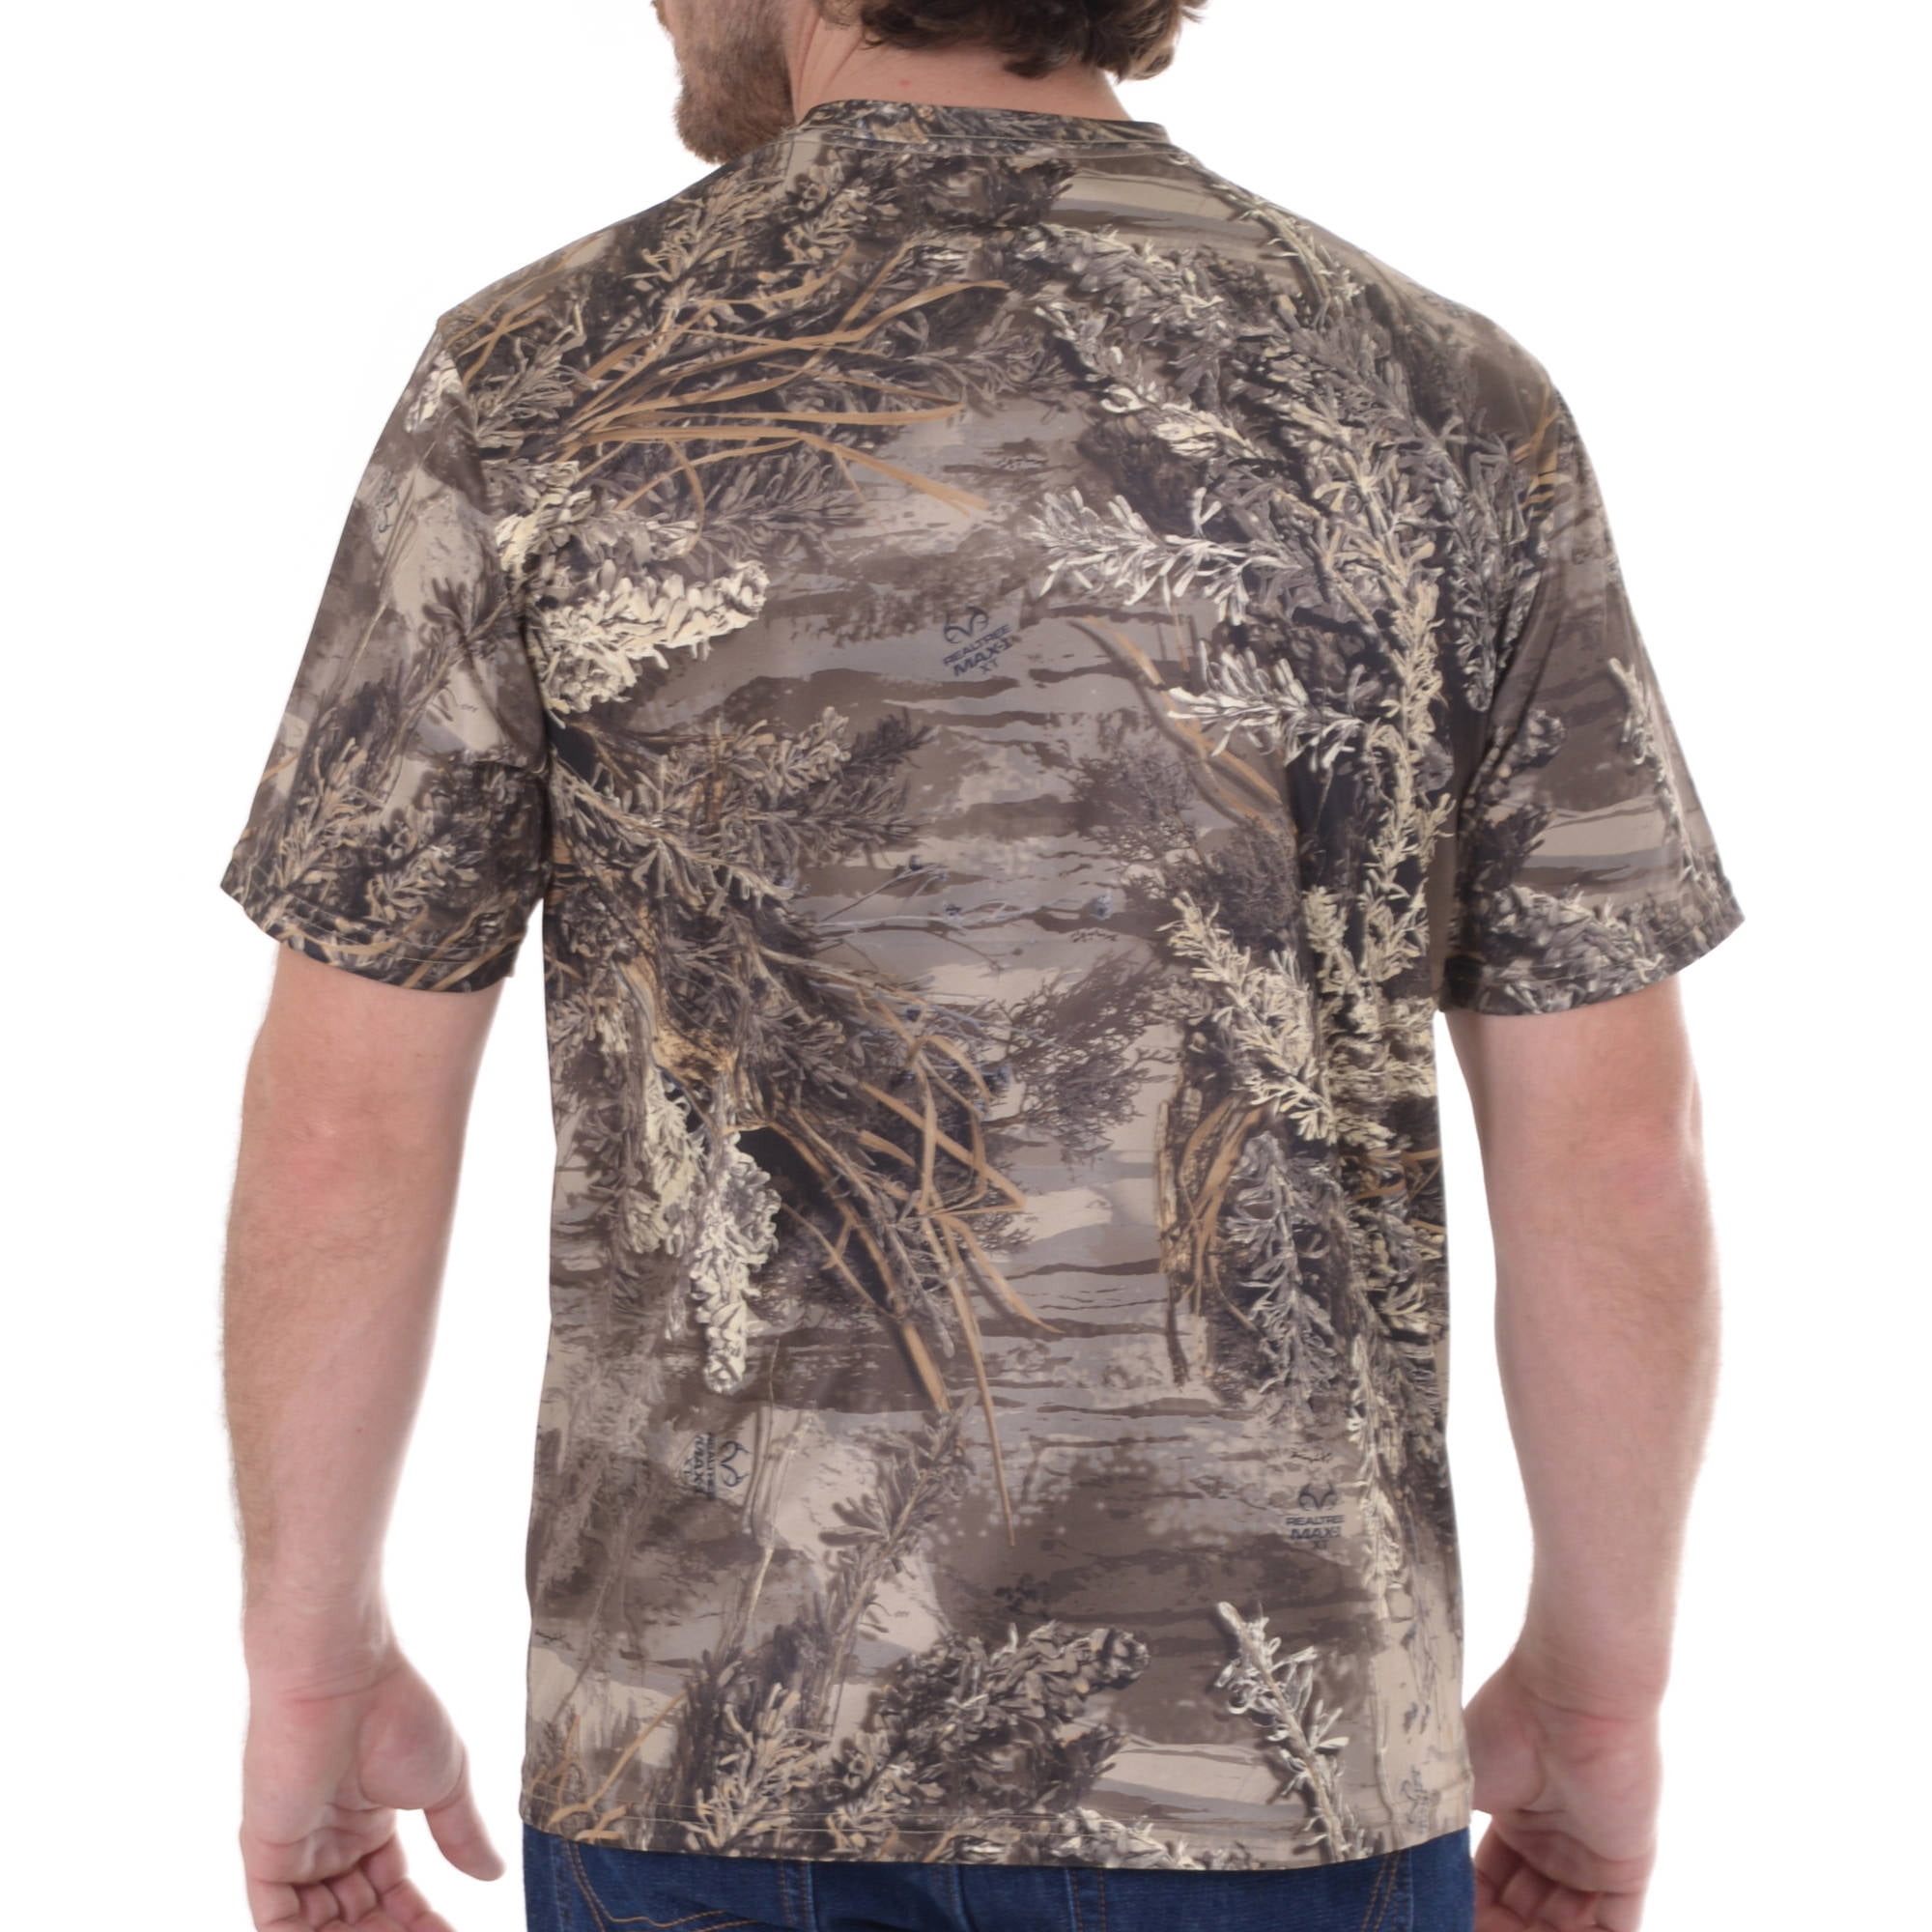 Women 2XL Camo T-shirts Short and Long Sleeve Realtree and Mossy Oak 